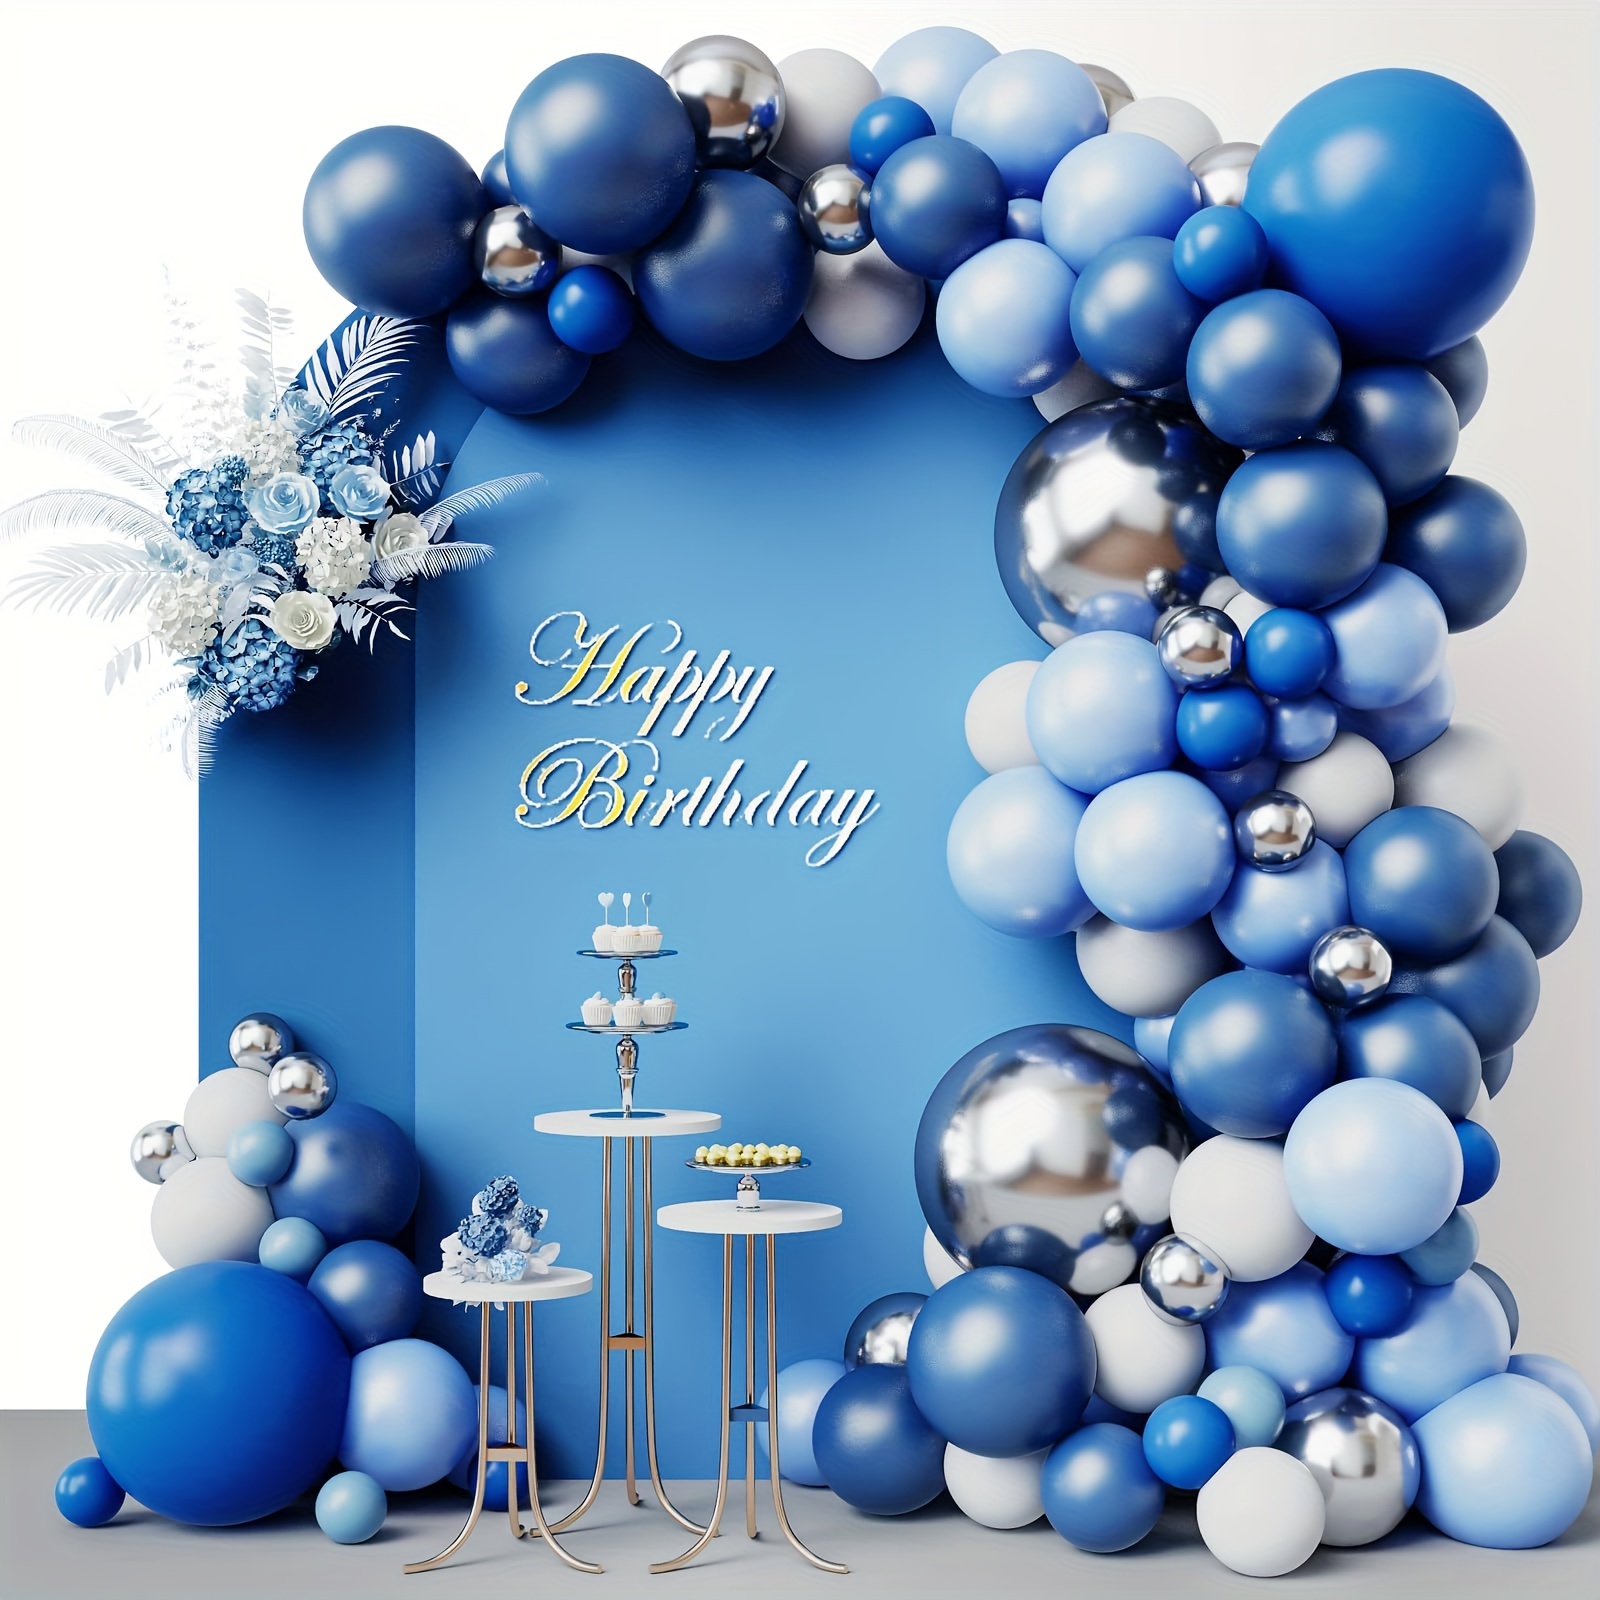 Blue and Black Silver Balloon Garland Kit 140pcs Royal Blue and Silver Starburst Disco Ball Balloons for Men 30th Birthday Party Graduation 80s 90s